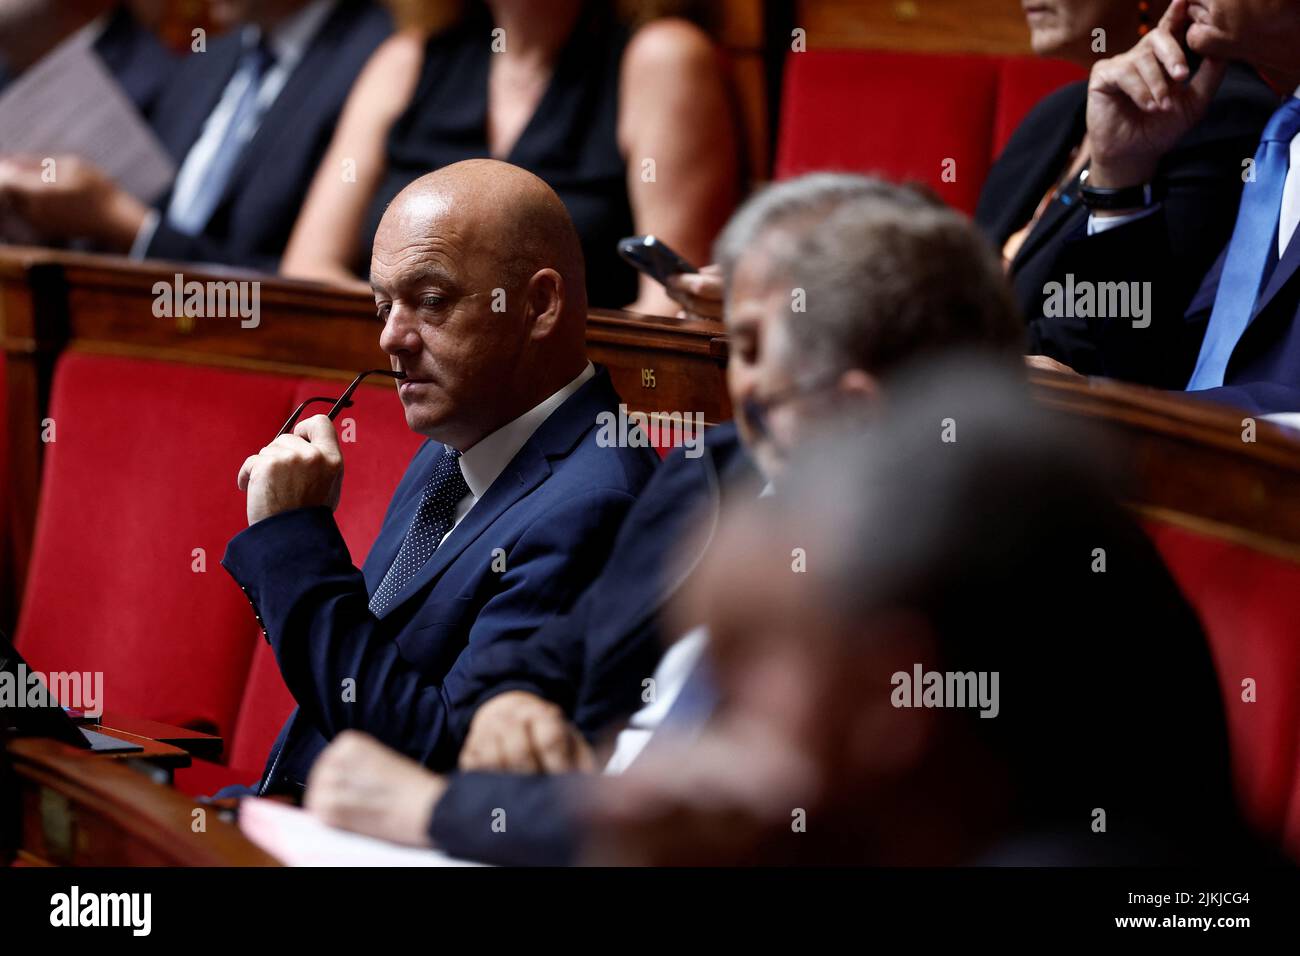 Member of parliament Thierry Benoit attends the questions to the government session at the National Assembly in Paris, France, August 2, 2022. REUTERS/Benoit Tessier Stock Photo